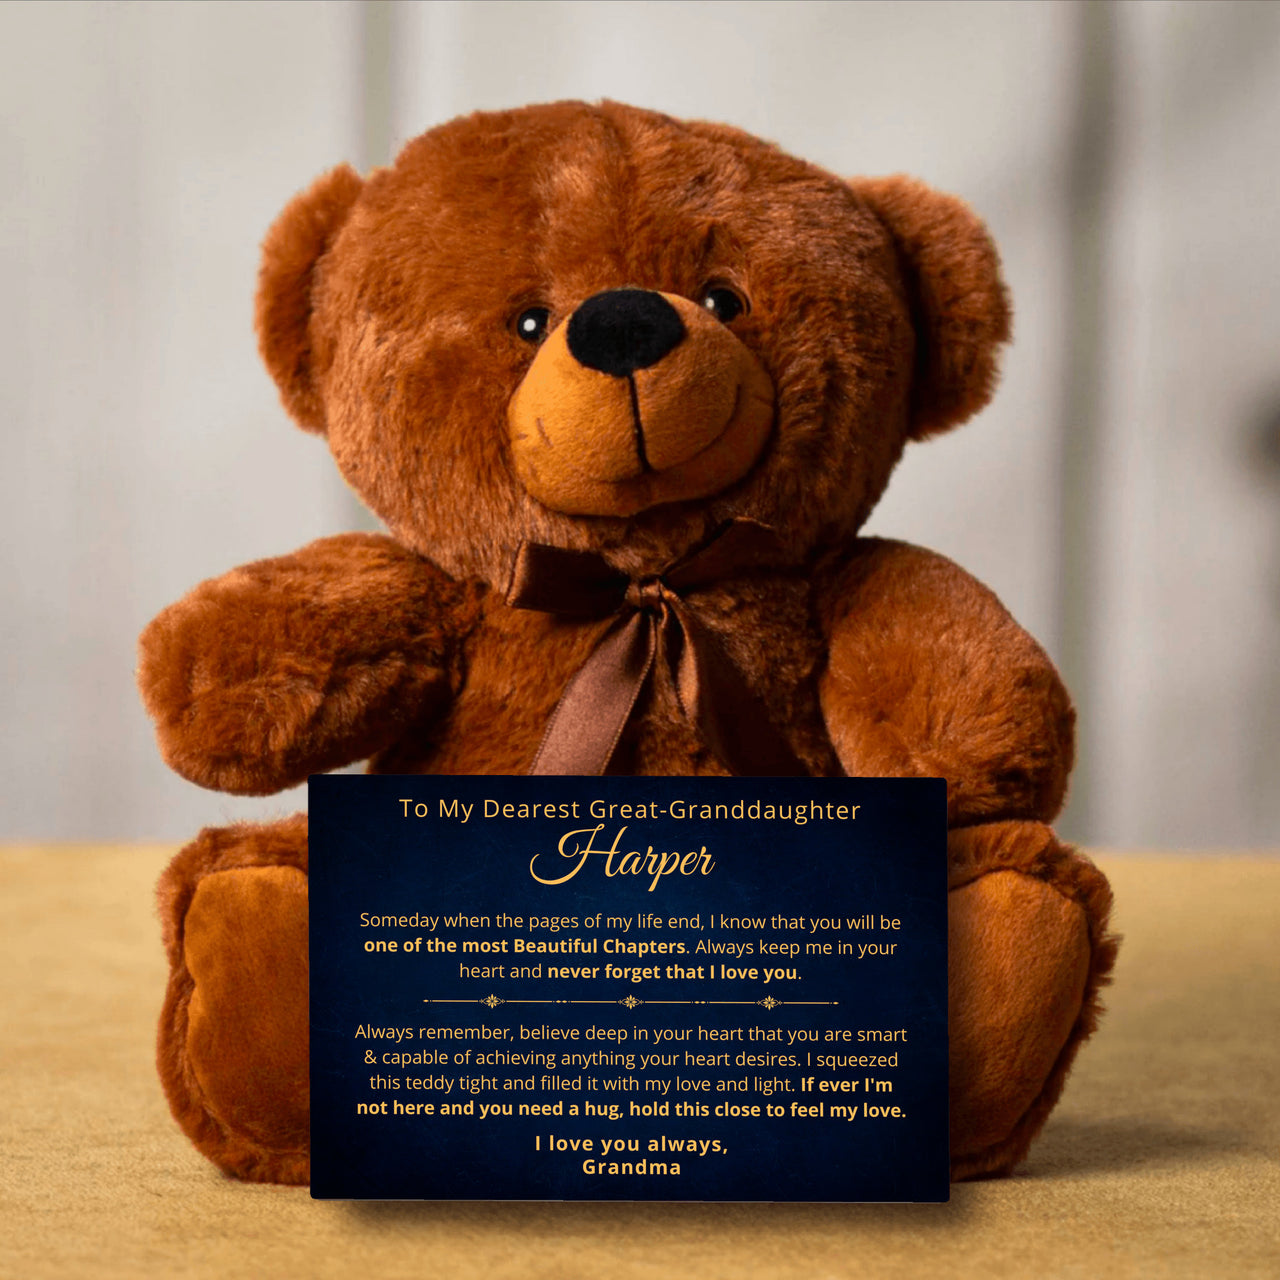 Great-Granddaughter, Never Forget - Teddy Bear with Personalized Canvas (G-GD79-P)